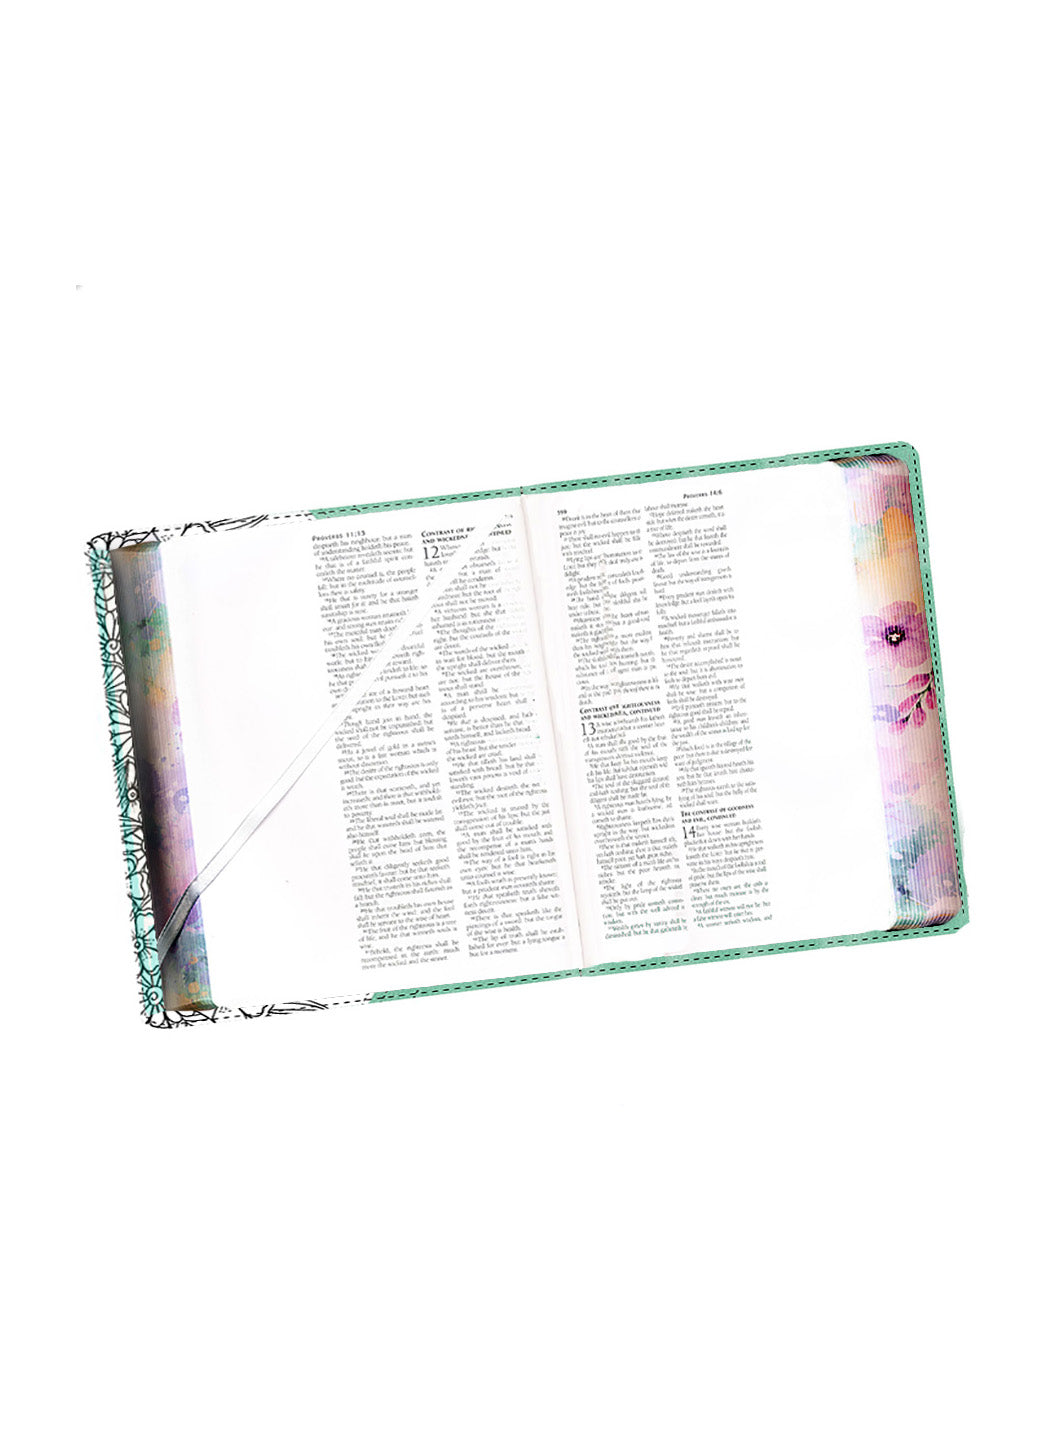 KJV Teal and White Personal Reflections Home & Lifestyle